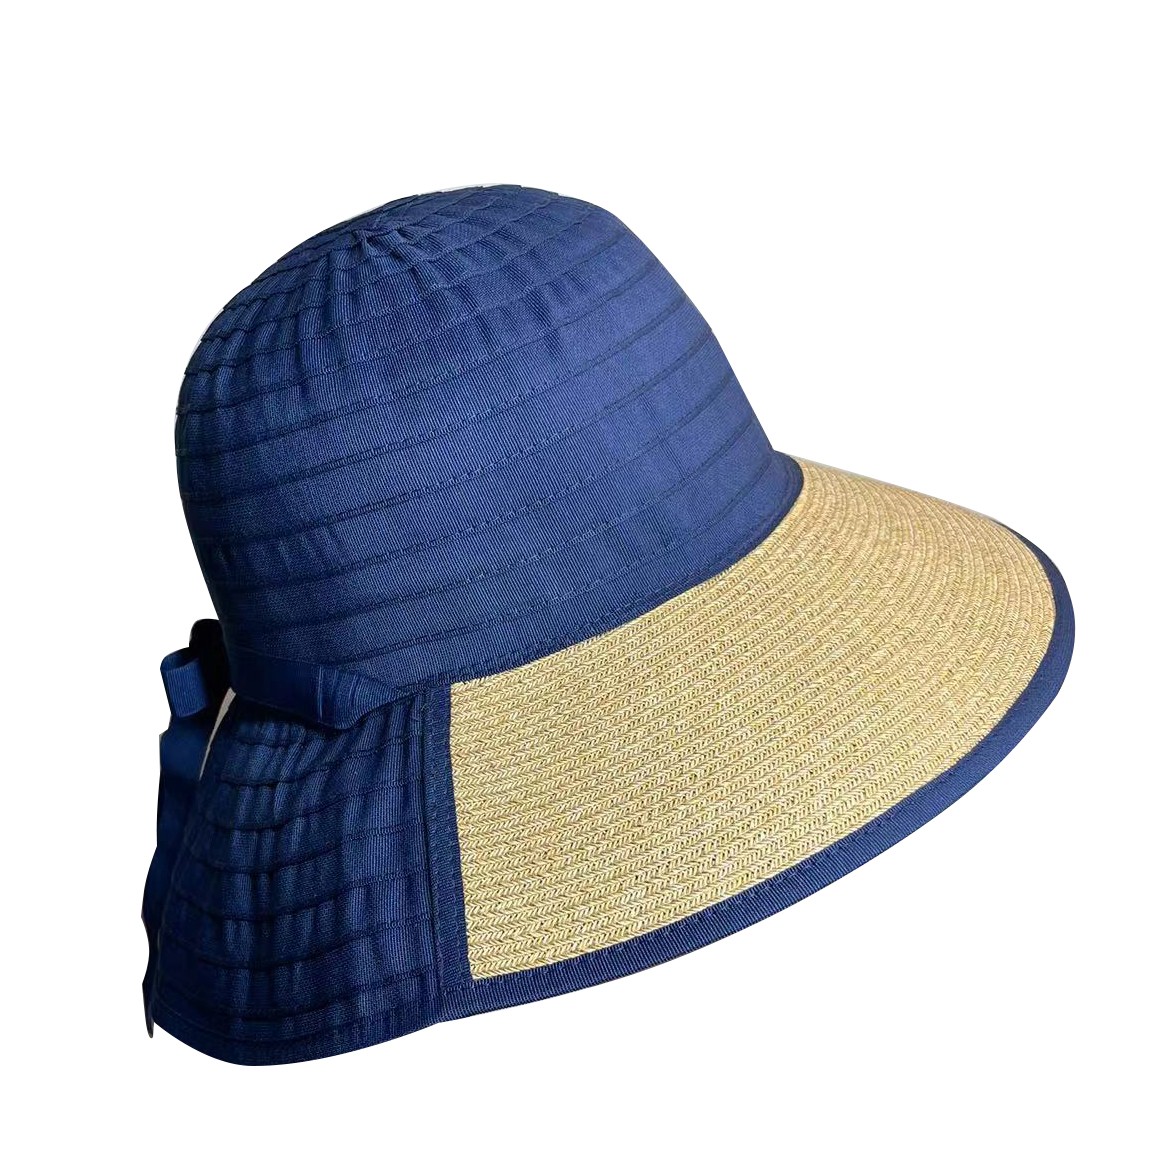 foldable straw hat for women